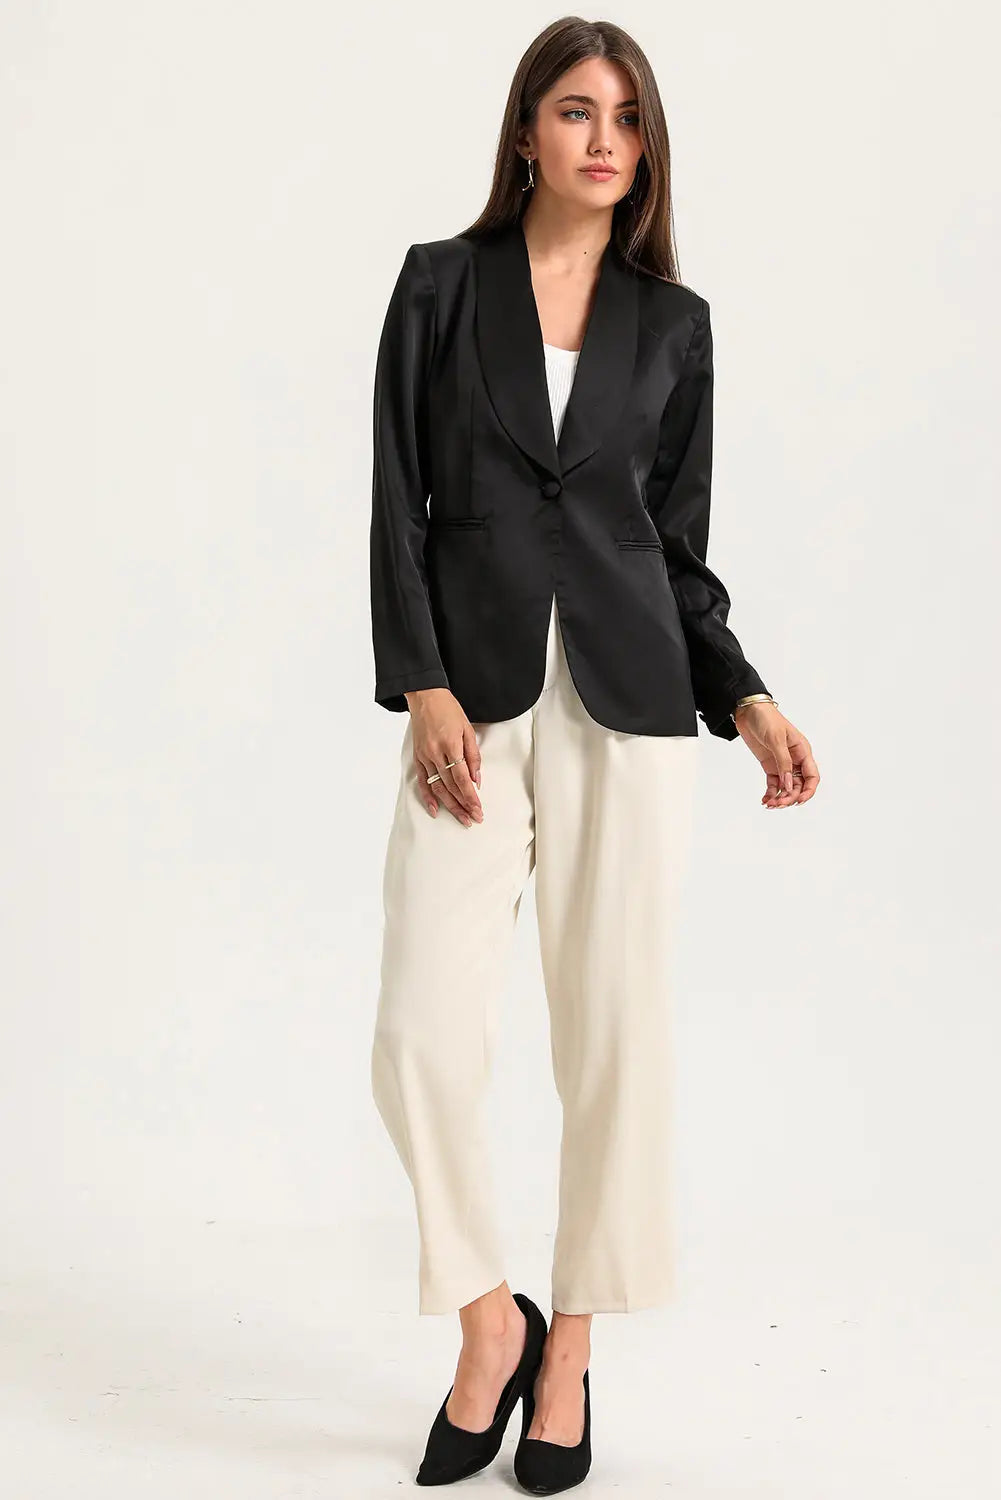 Black collared neck single breasted blazer with pockets - blazers